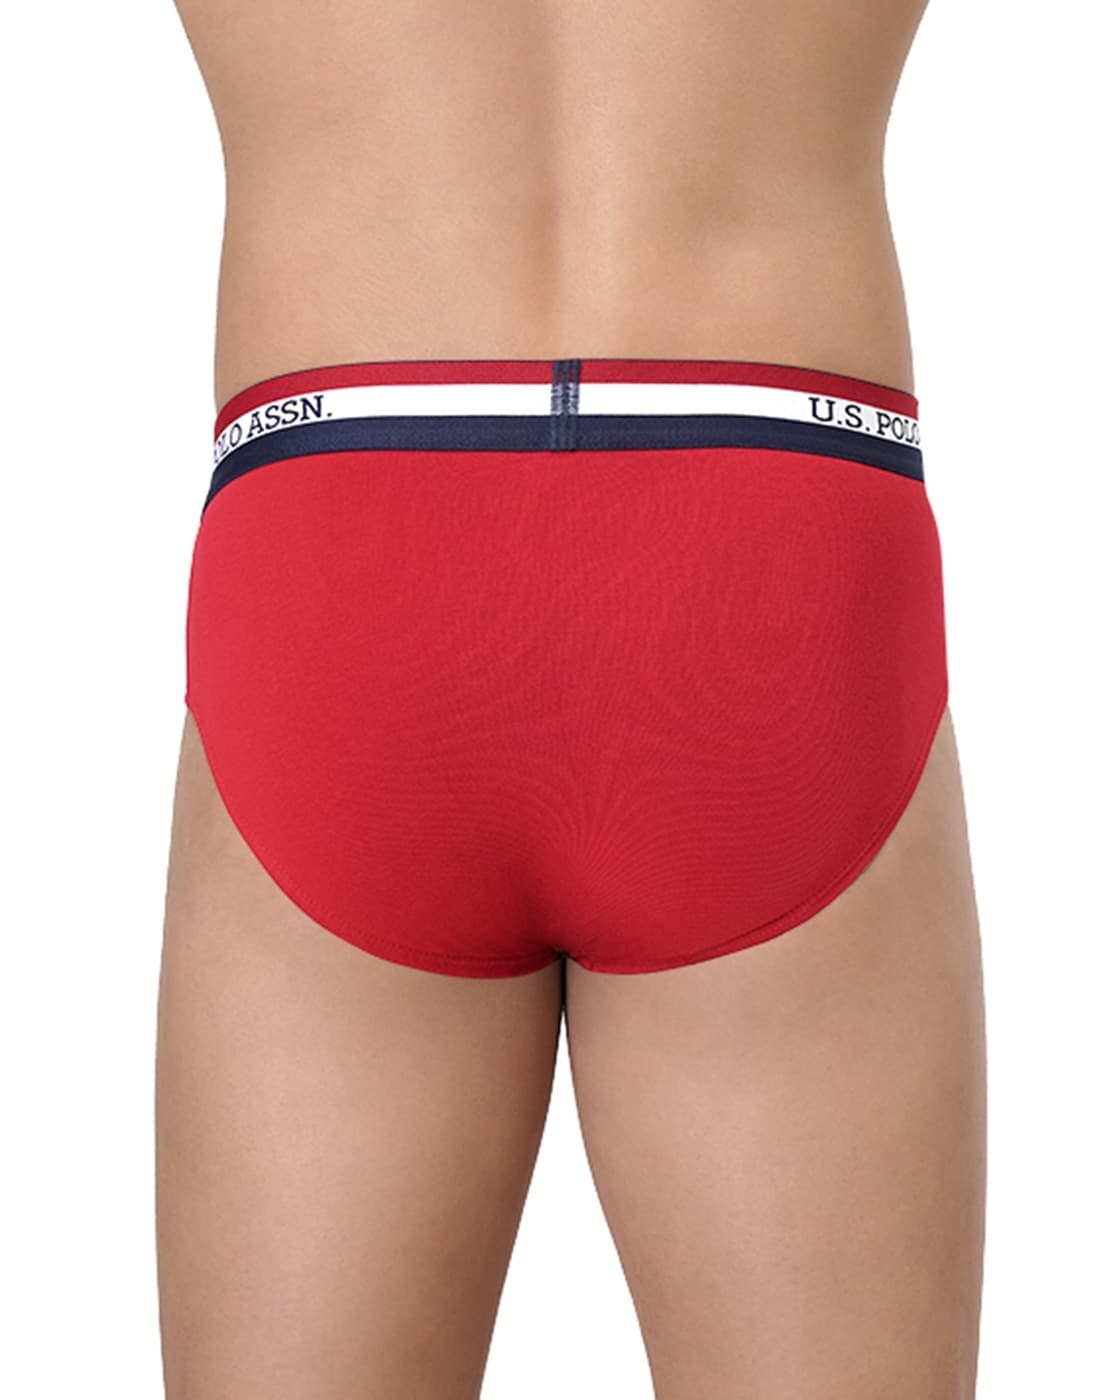 Buy Black & Red Briefs for Men by U.S. Polo Assn. Online